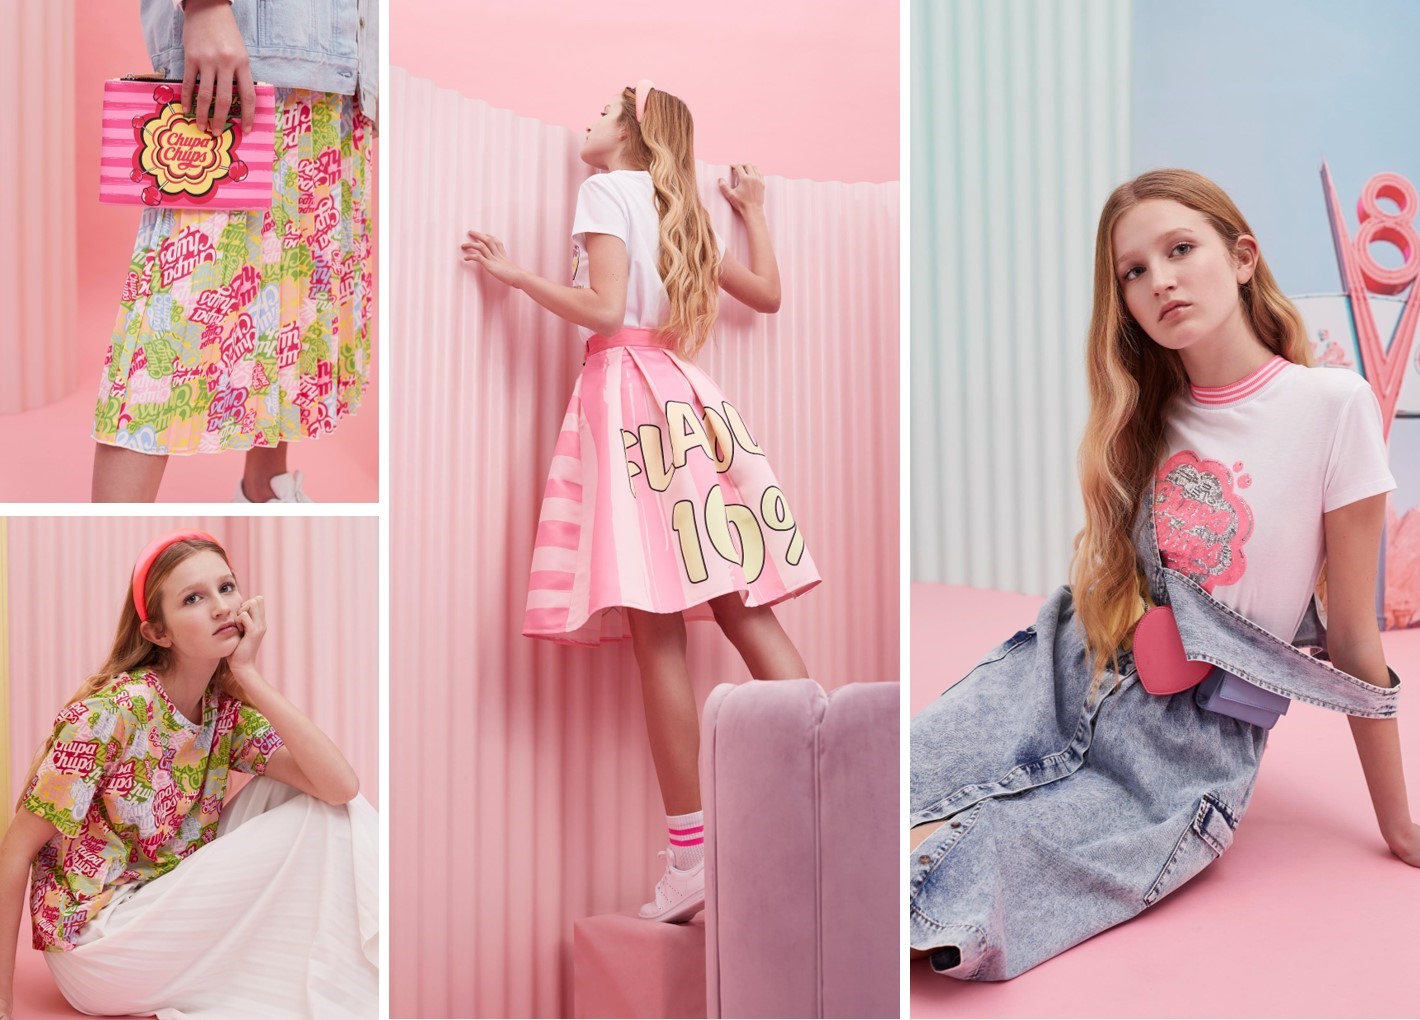 Chupa Chups and Mentos Fashion Collection launched at Riva Stores in the Middle East image